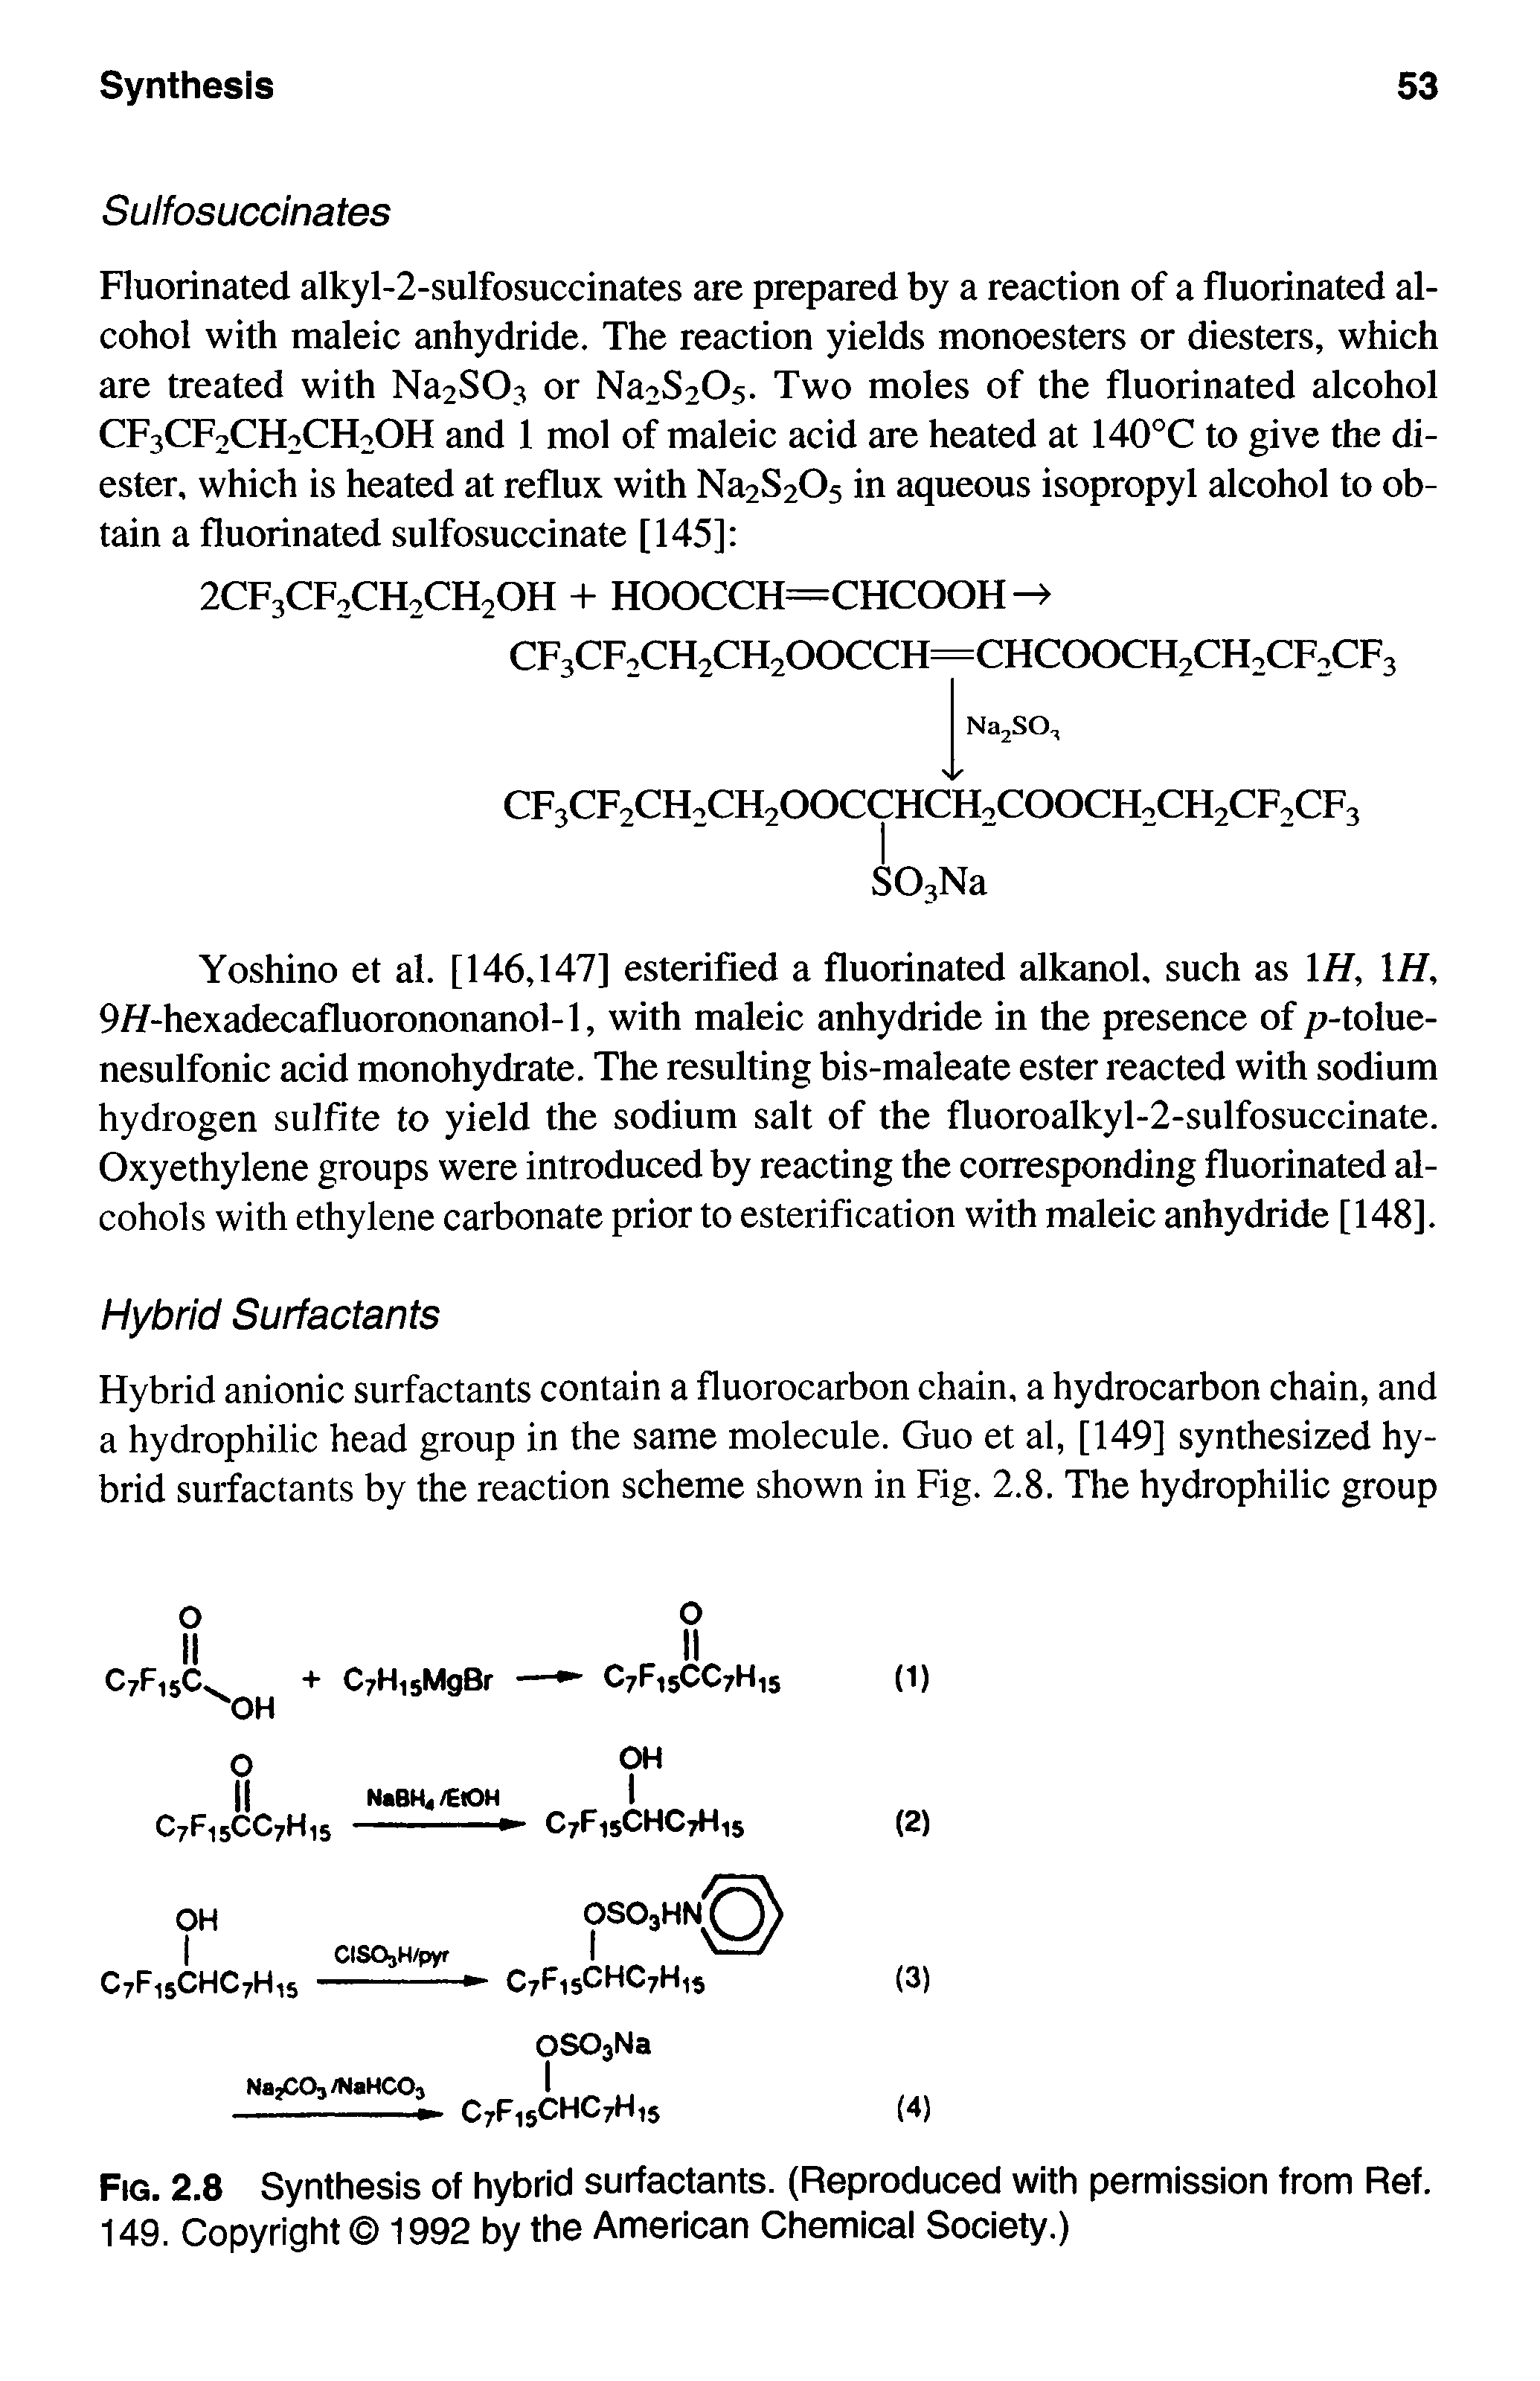 Fig. 2.8 Synthesis of hybrid surfactants. (Reproduced with permission from Ref. 149. Copyright 1992 by the American Chemical Society.)...